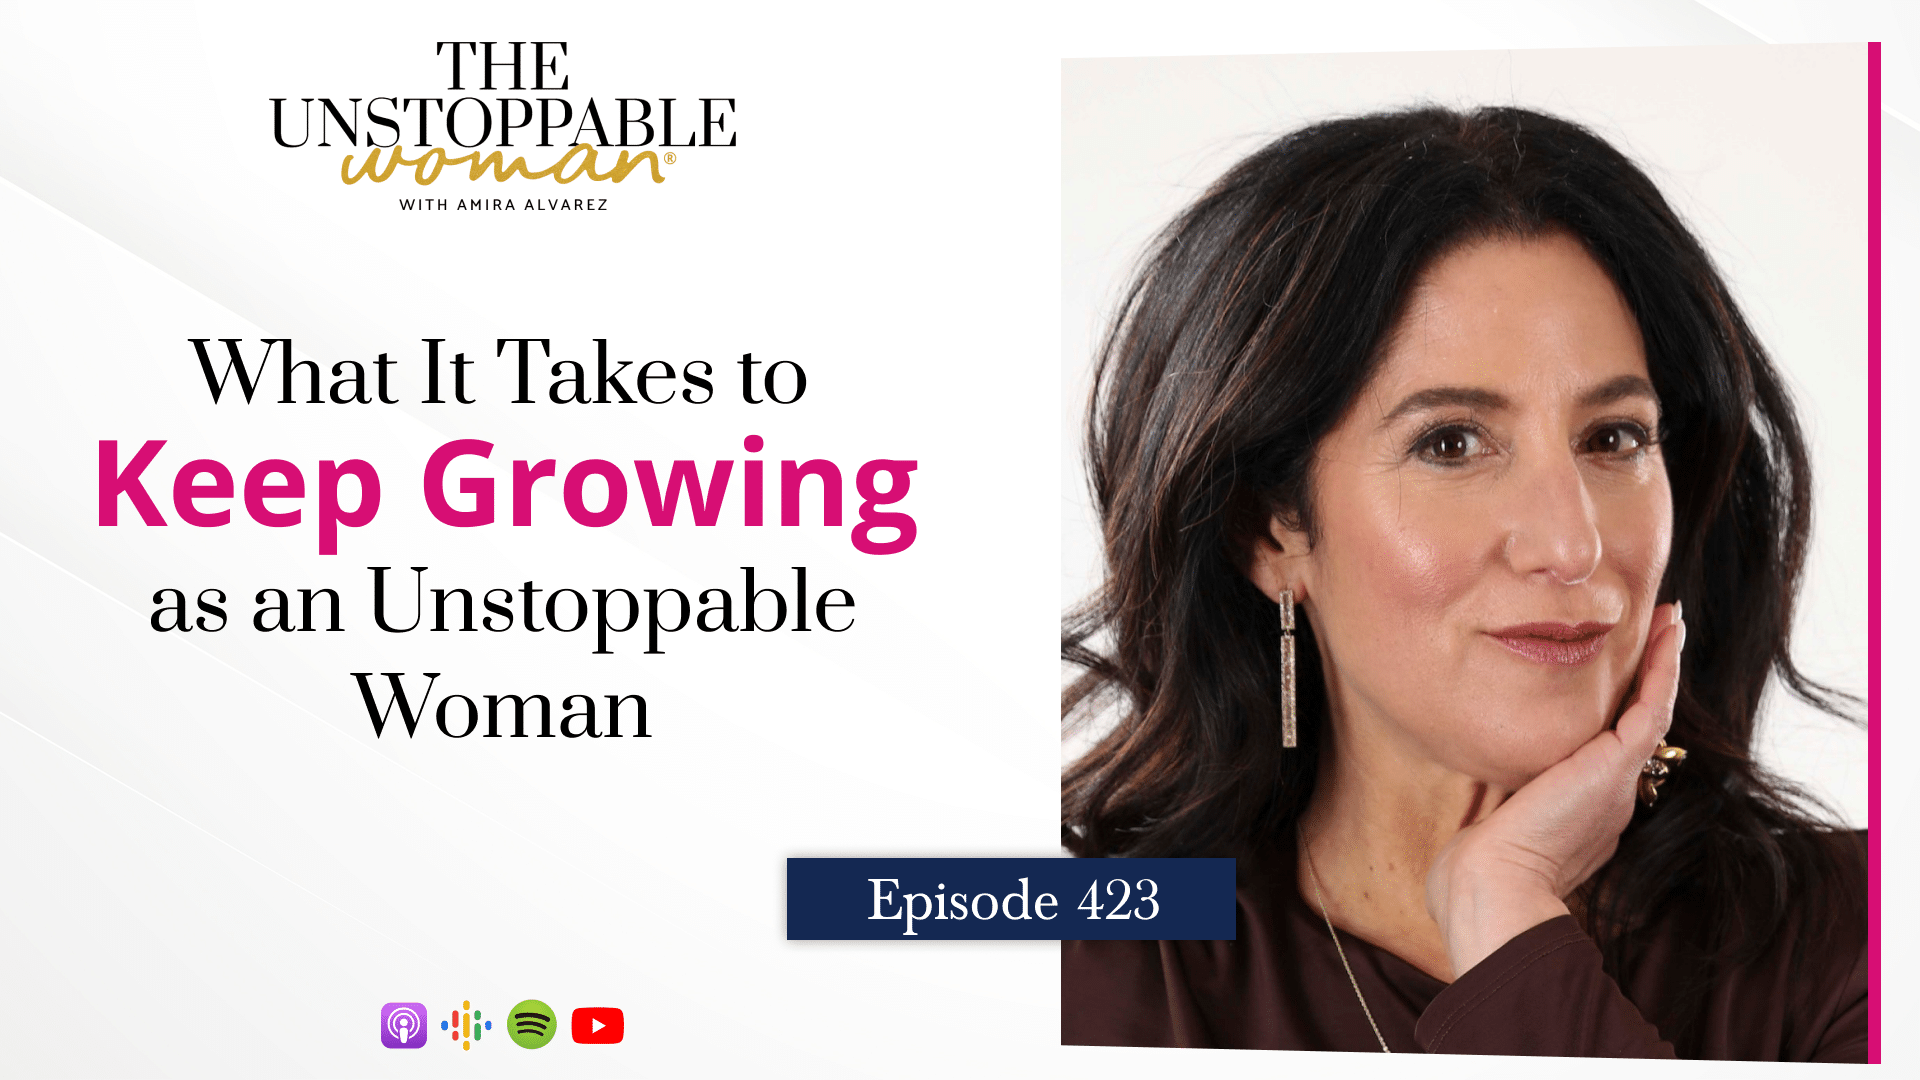 [Image: What It Takes to Keep Growing as an Unstoppable Woman]